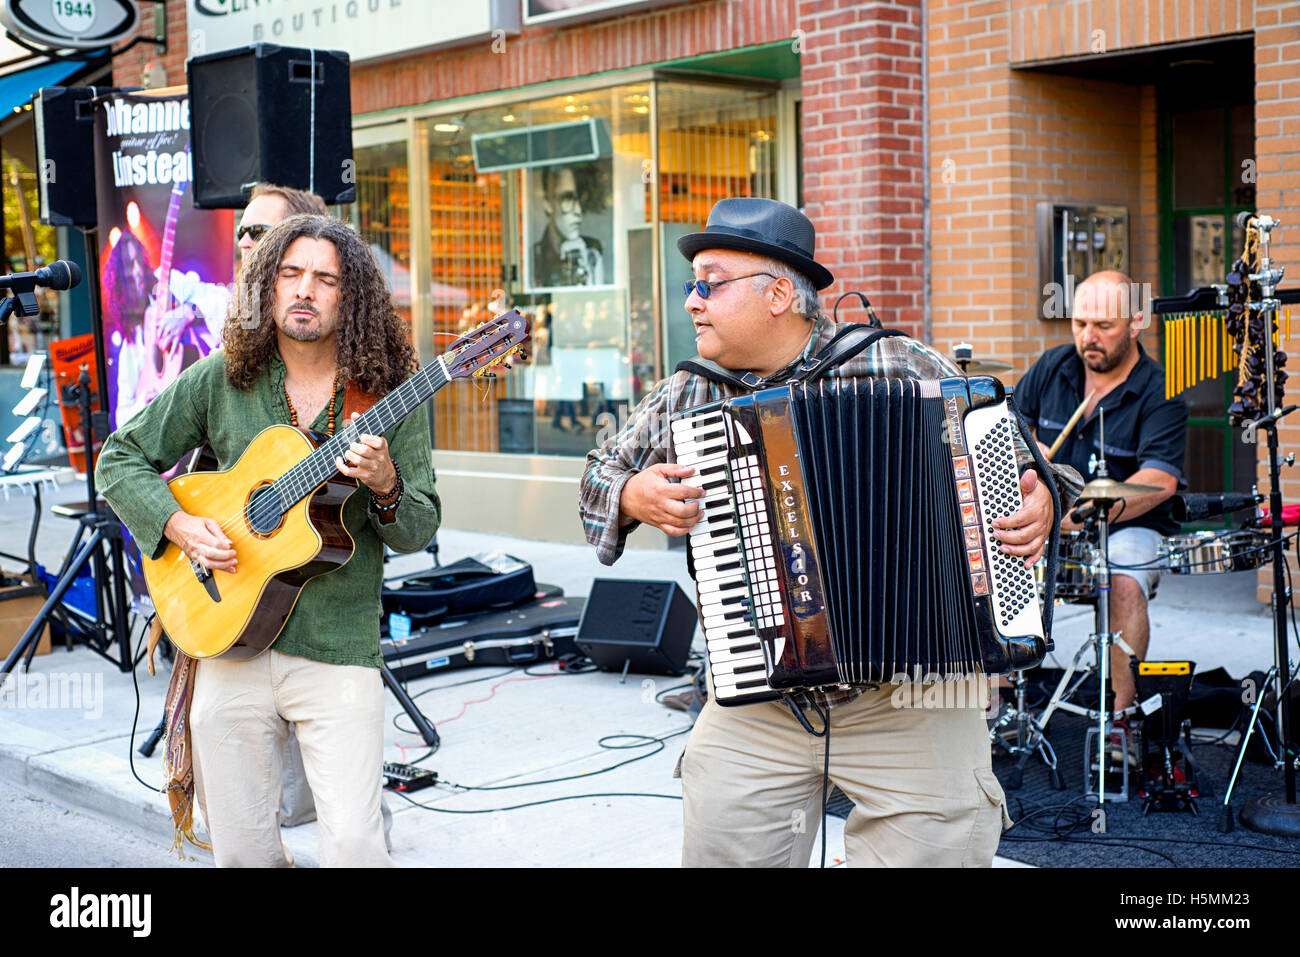 TORONTO, CANADA - AUGUST 22, 2015; Street perfomer during Toronto Jazz festival on Queen street east. Stock Photo